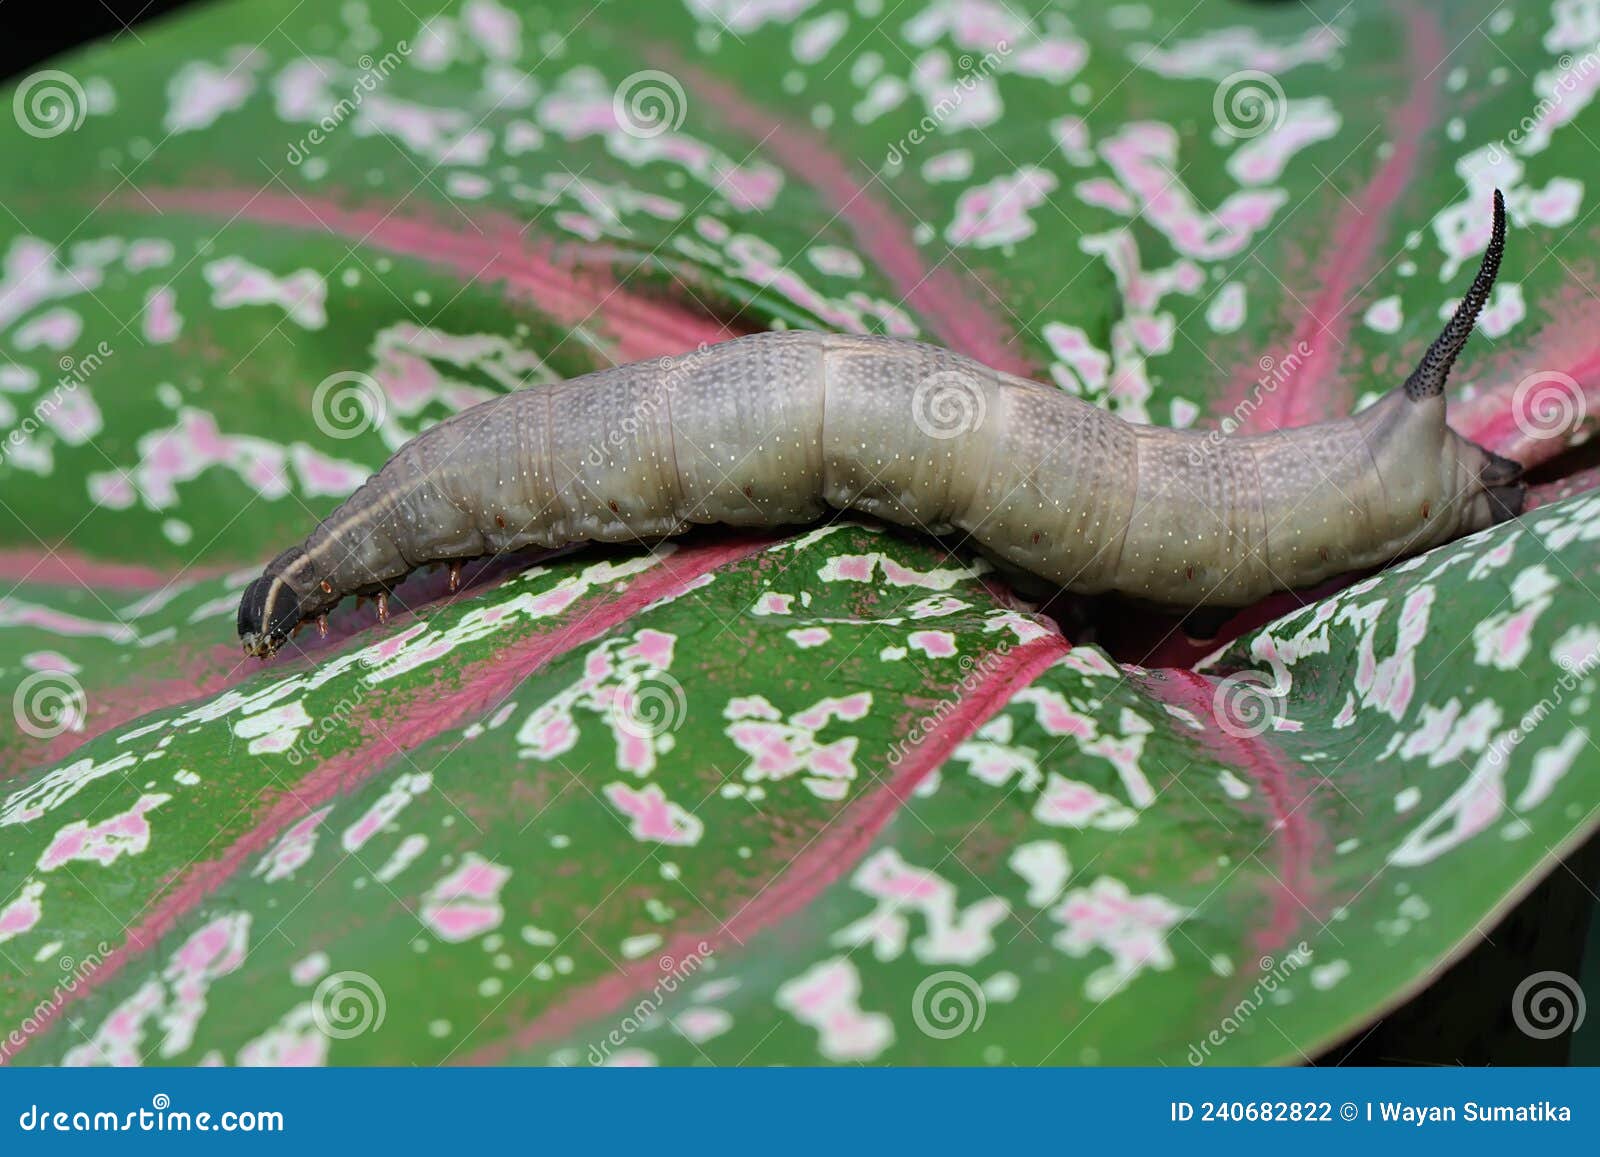 a tobacco hornworm is crawling on a caladium leave.